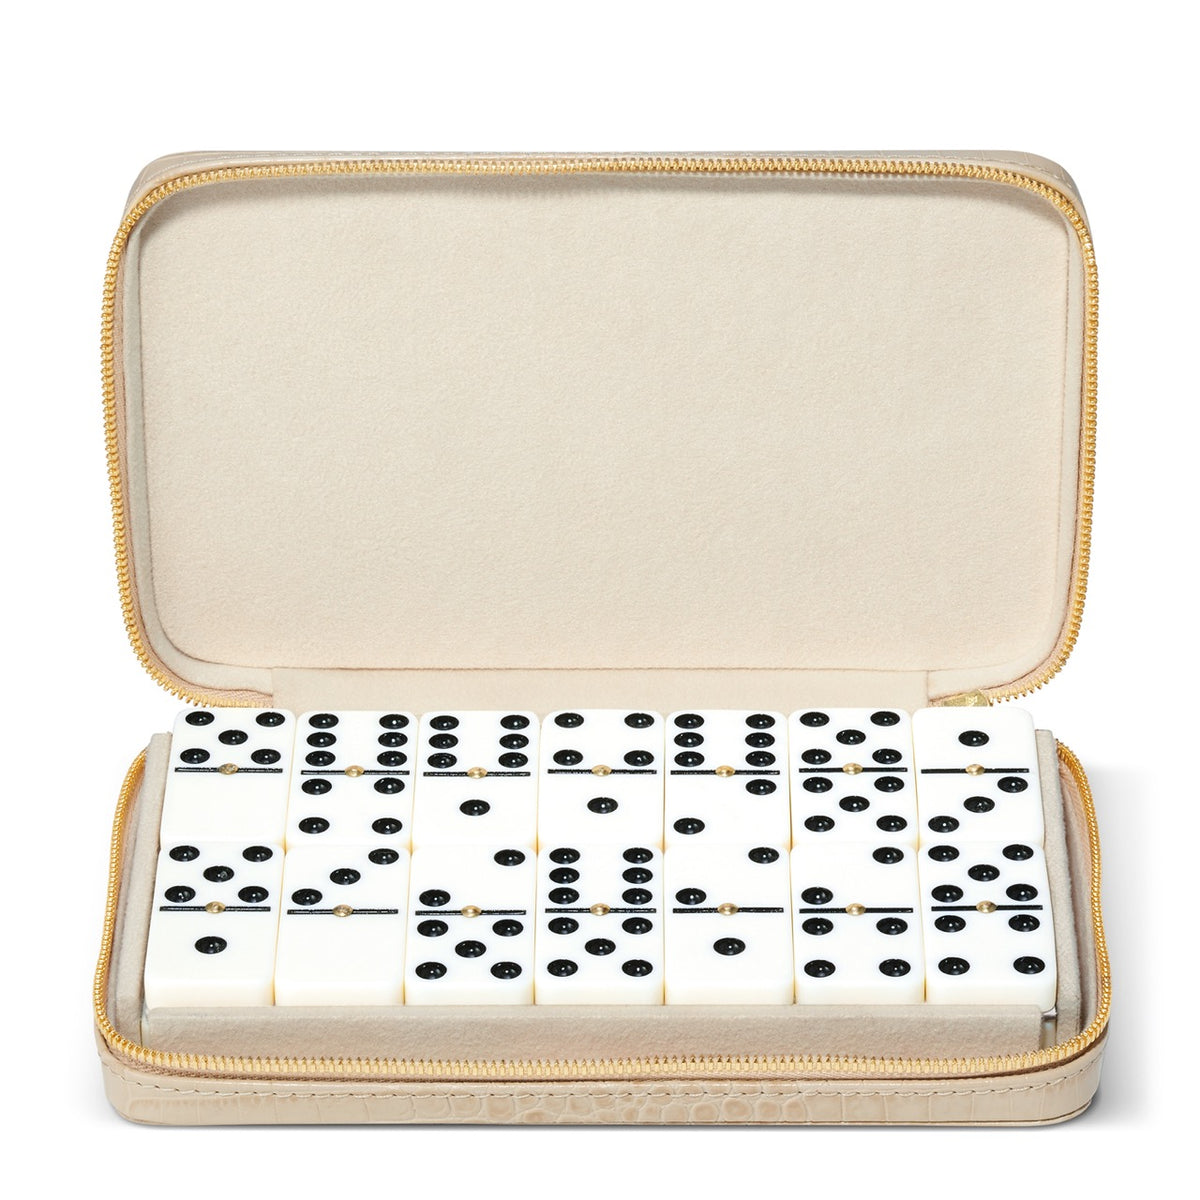 Enzo Travel Domino Set in Fawn